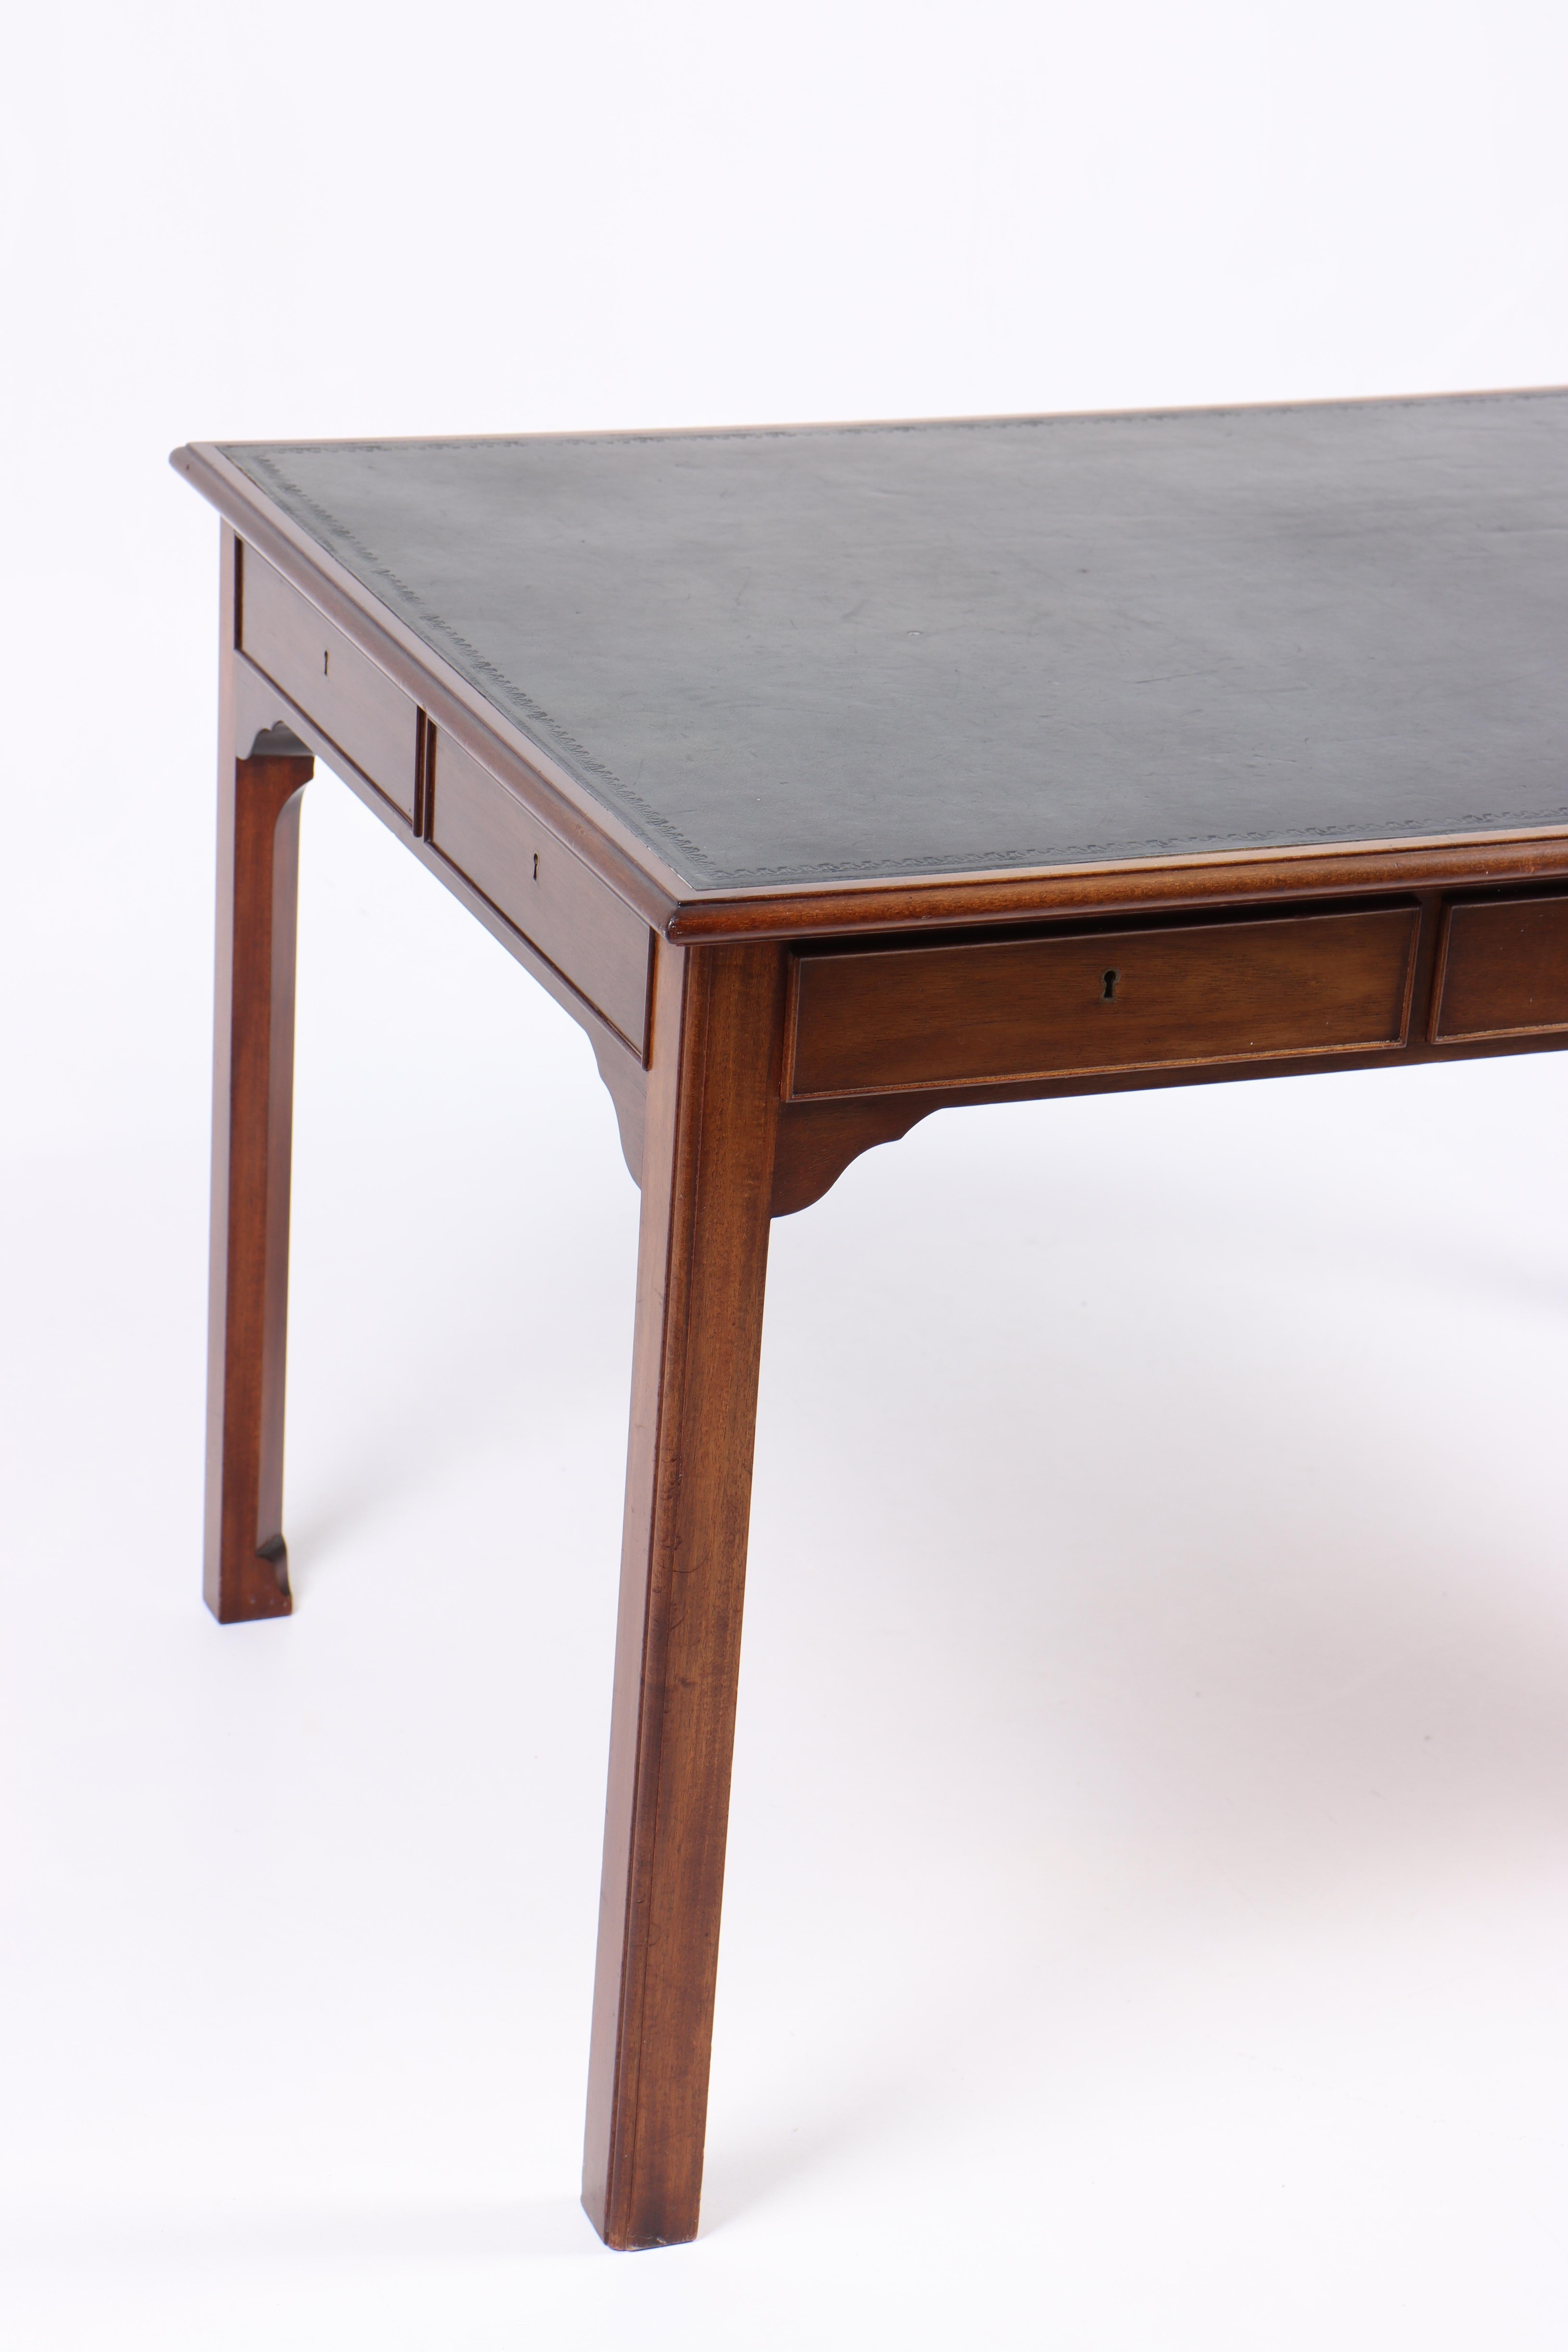 Desk in mahogany and patinated leather. Designed and made in Denmark. Great original condition.

